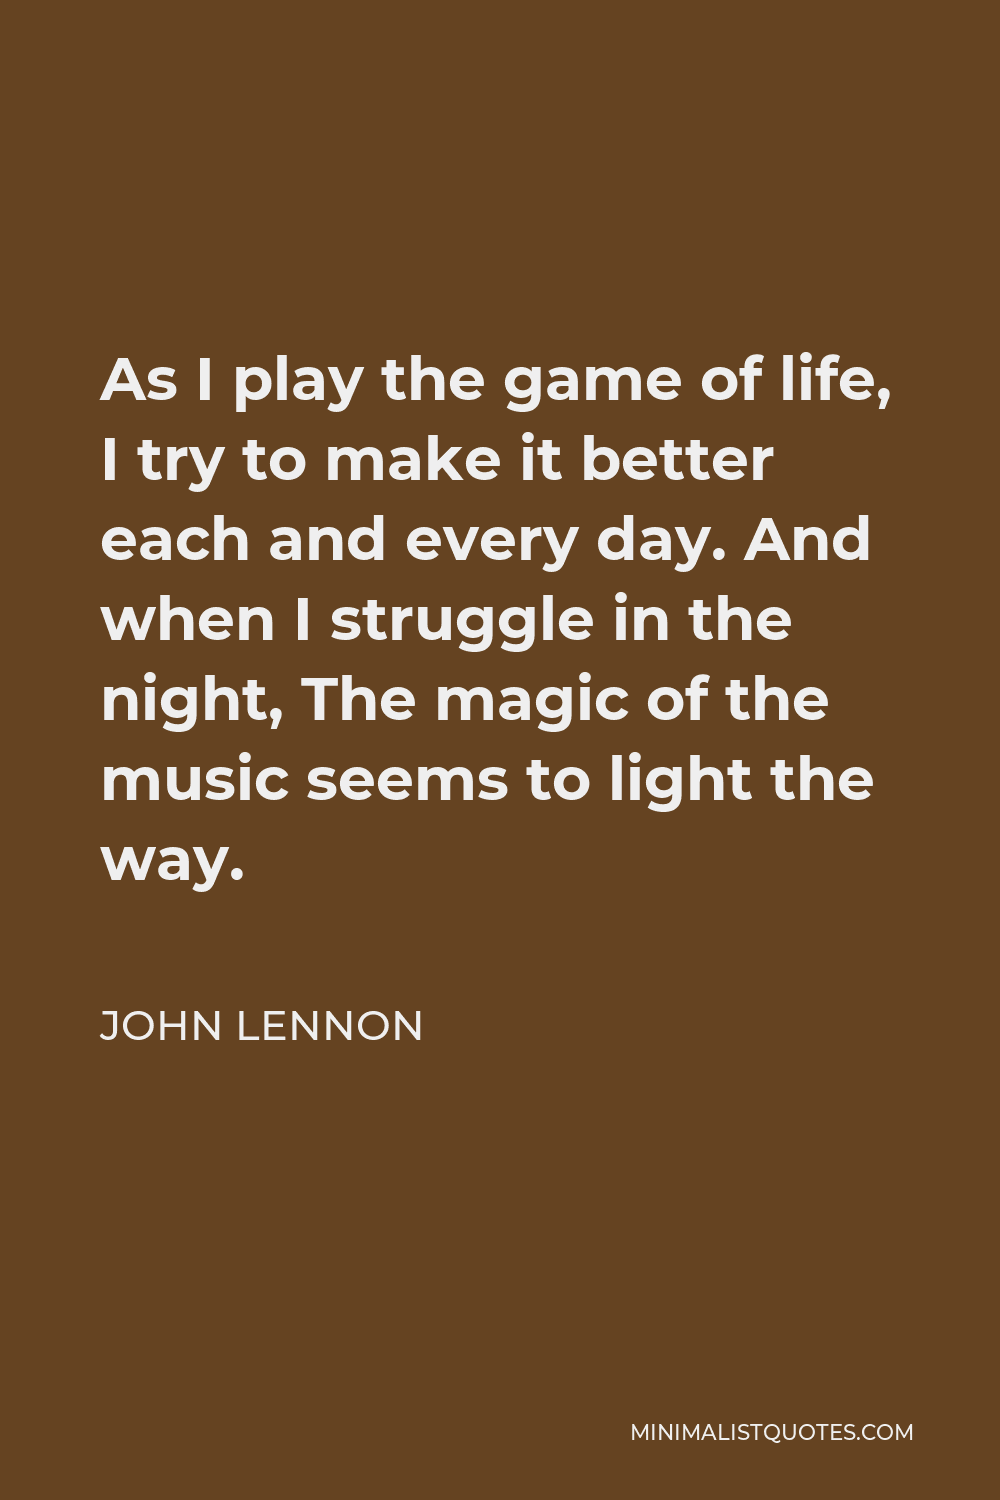 John Lennon Quote - As I play the game of life, I try to make it better each and every day. And when I struggle in the night, The magic of the music seems to light the way.